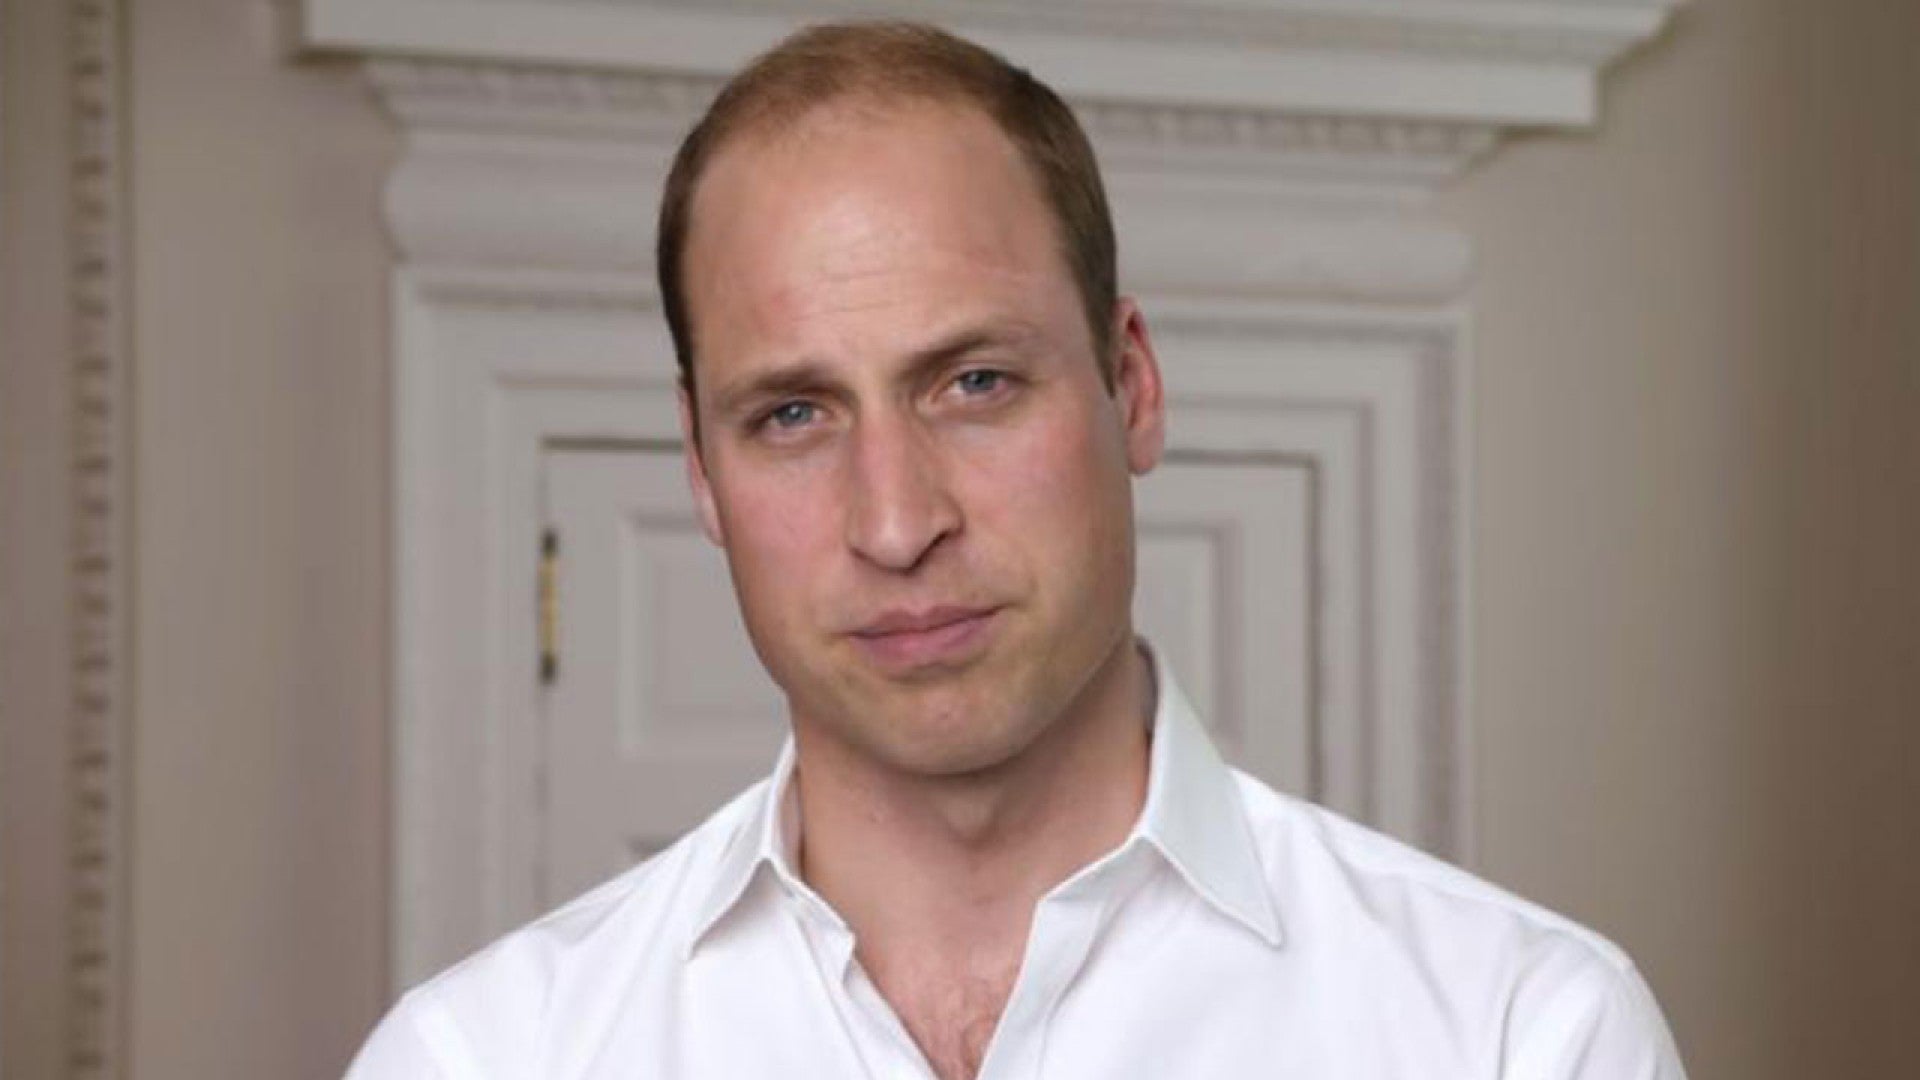 Prince William Is Standing Up Against Bullying in Powerful New PSA